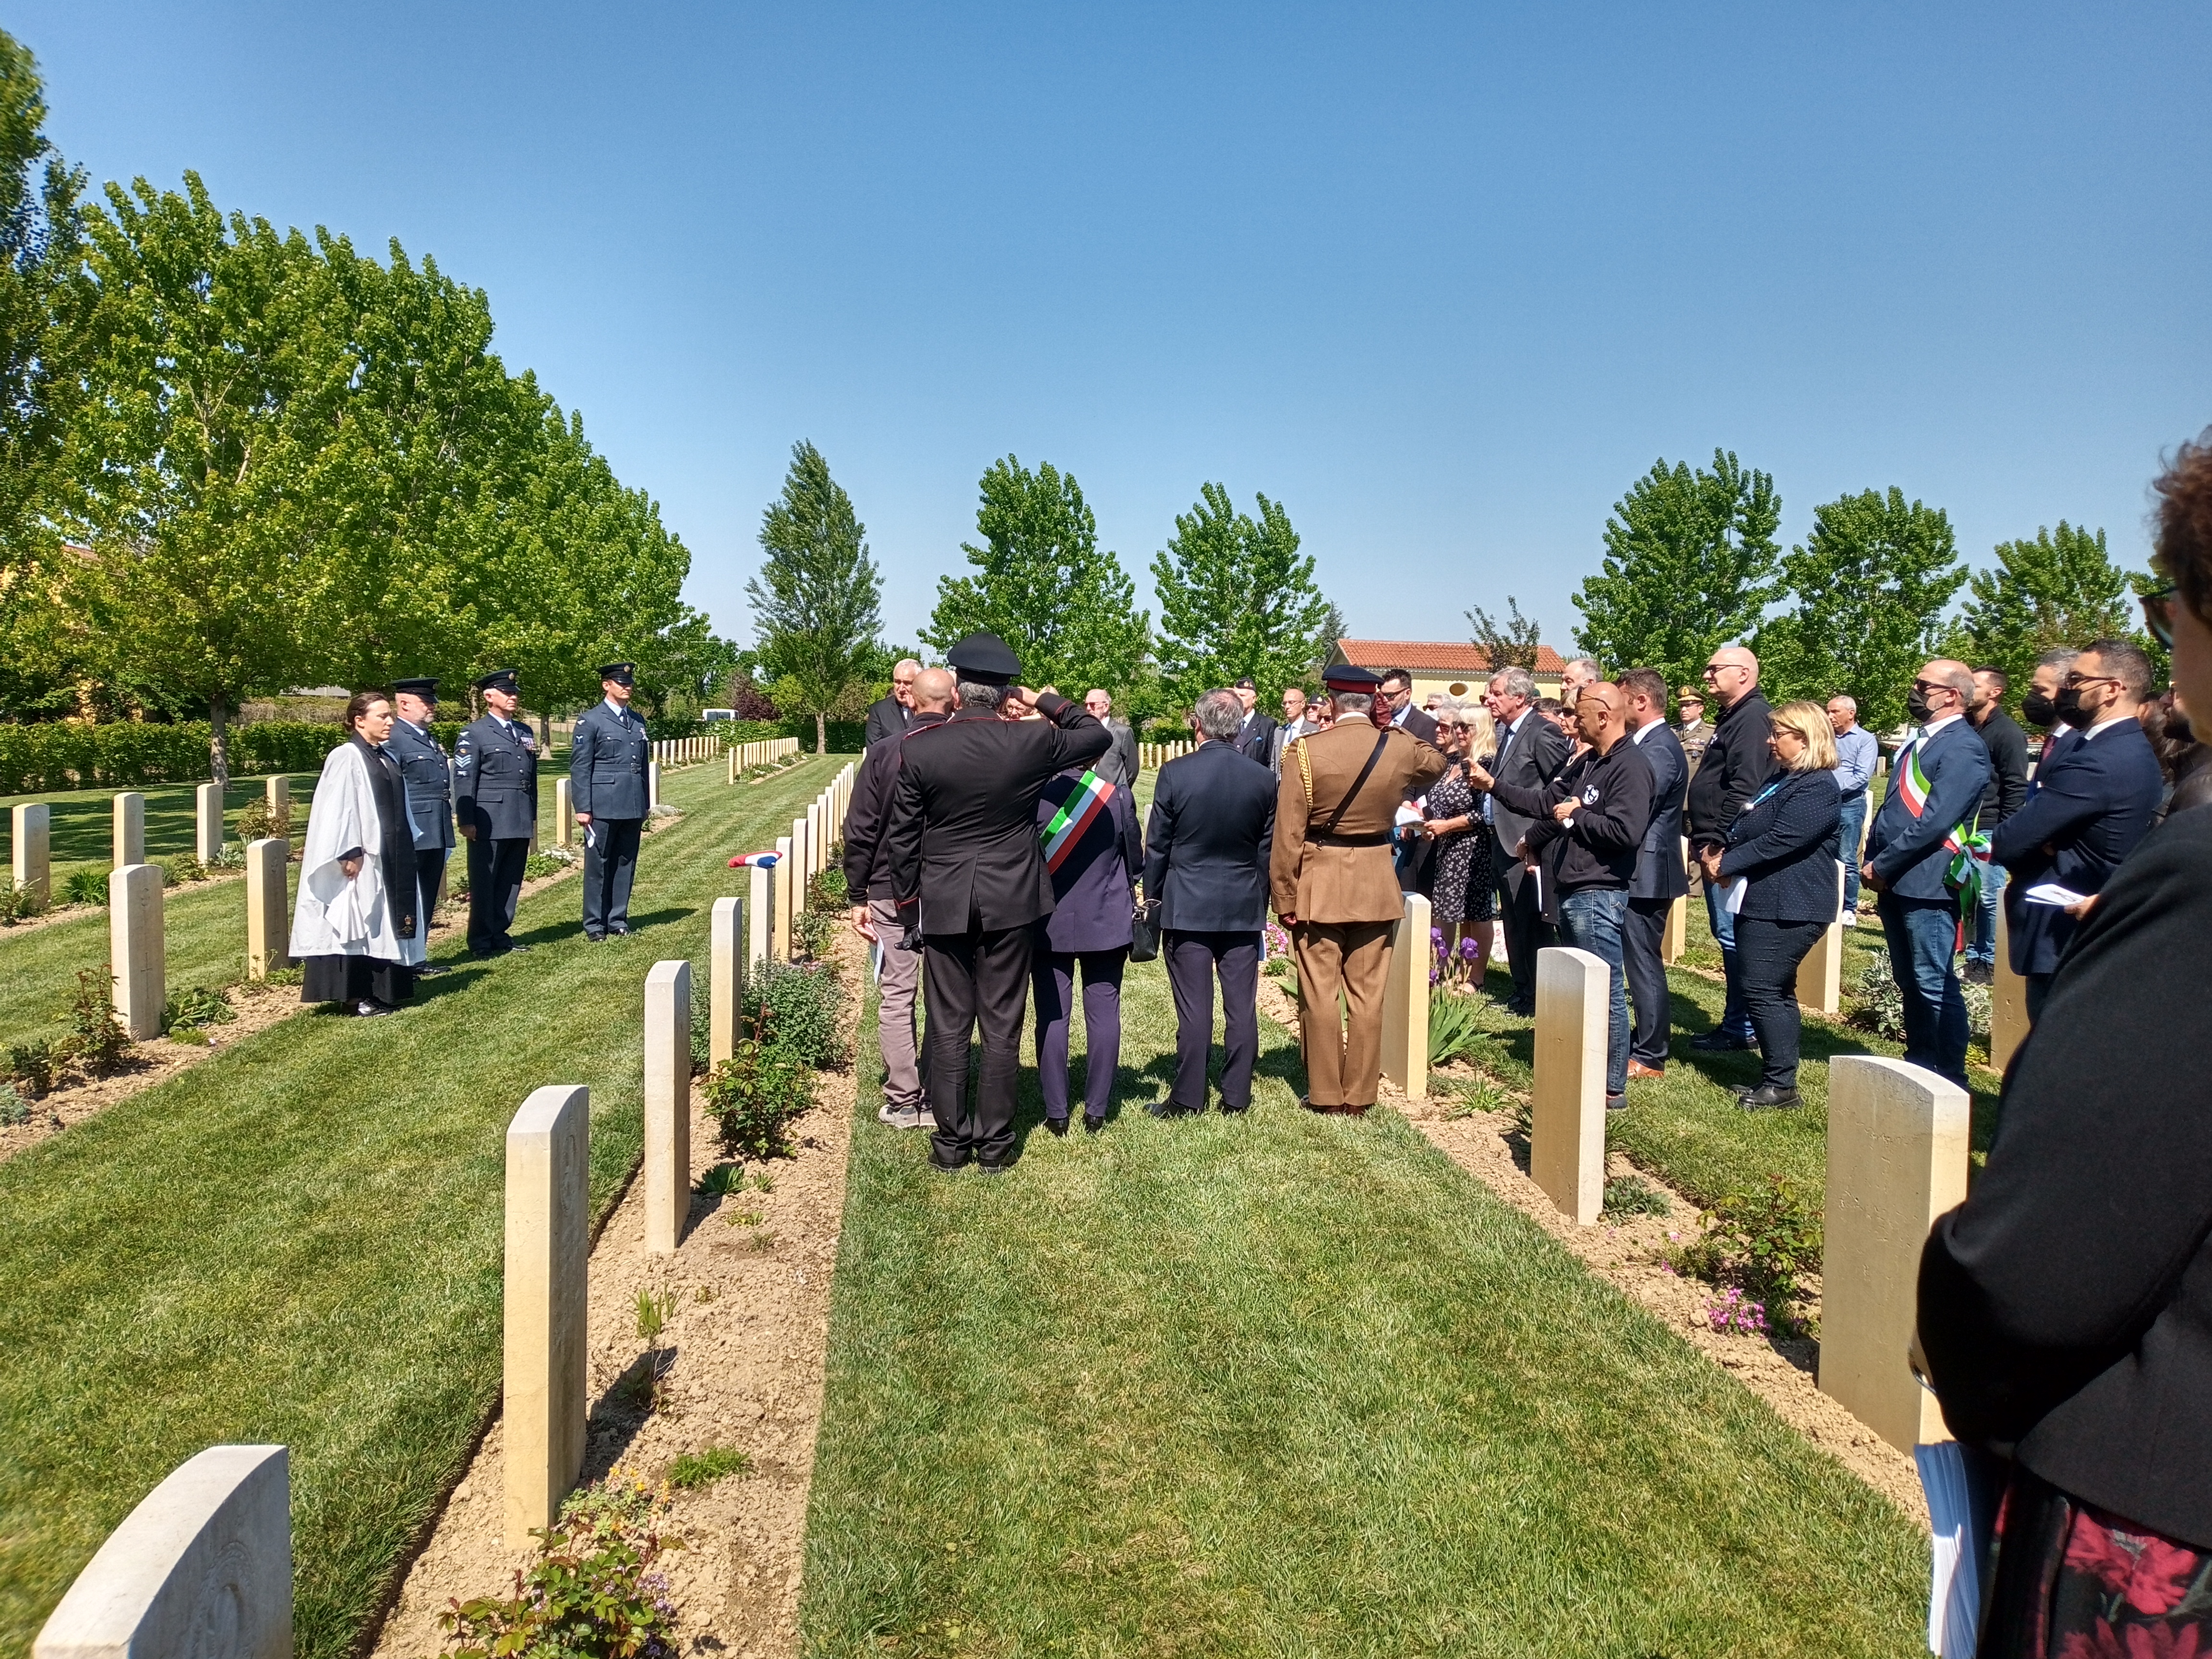 Veterans, personnel and members of the public stand by gravestones.